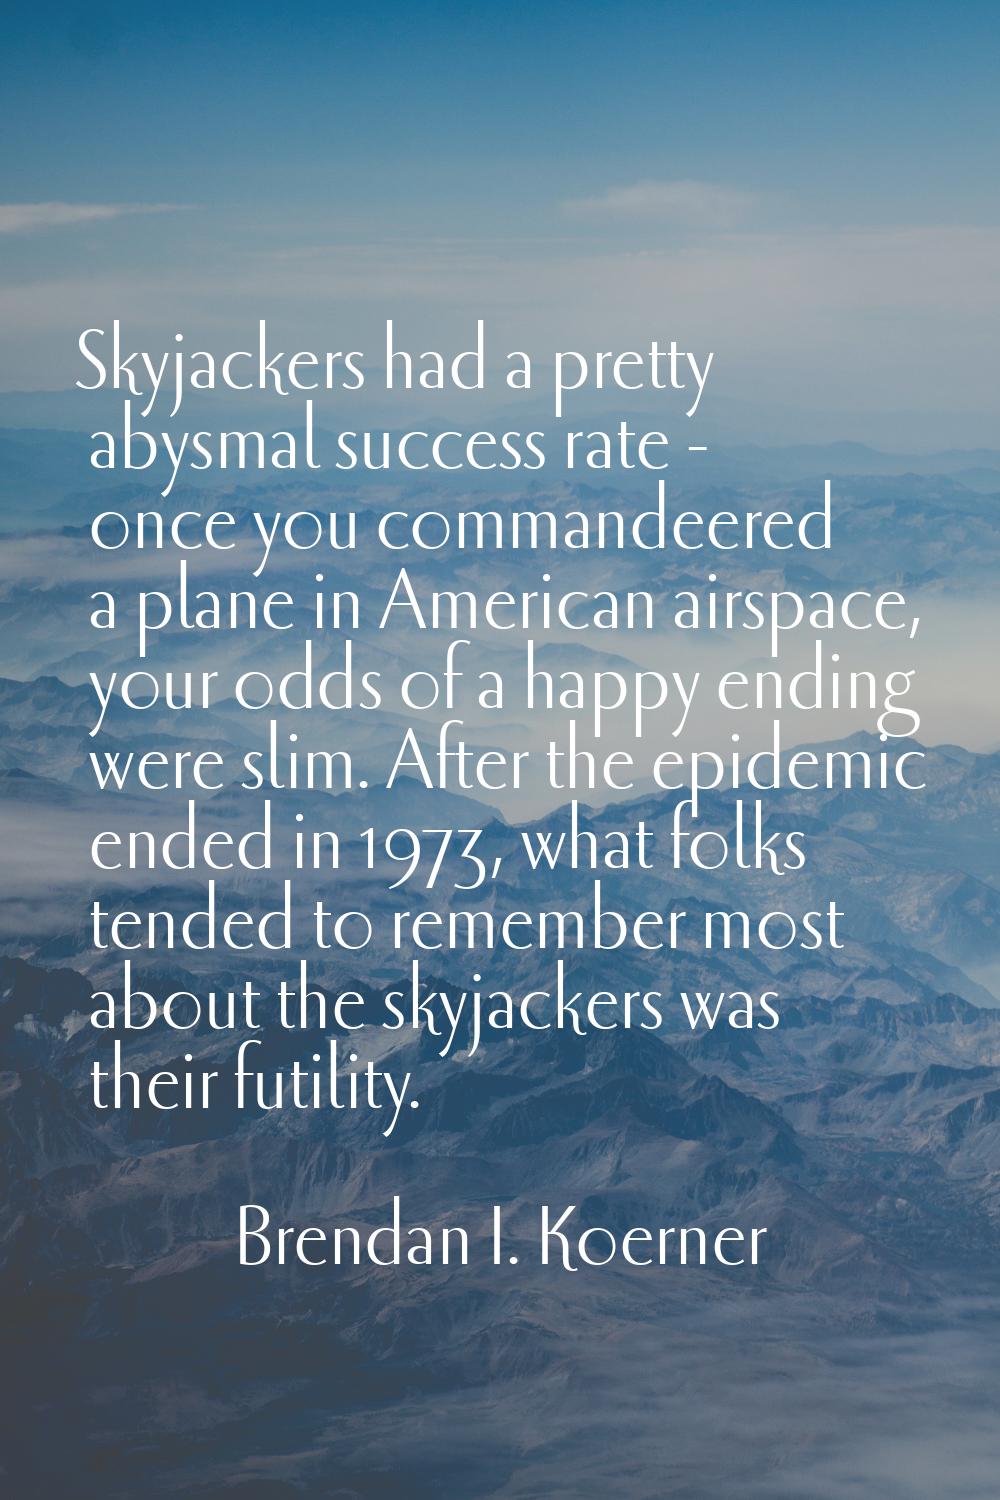 Skyjackers had a pretty abysmal success rate - once you commandeered a plane in American airspace, 